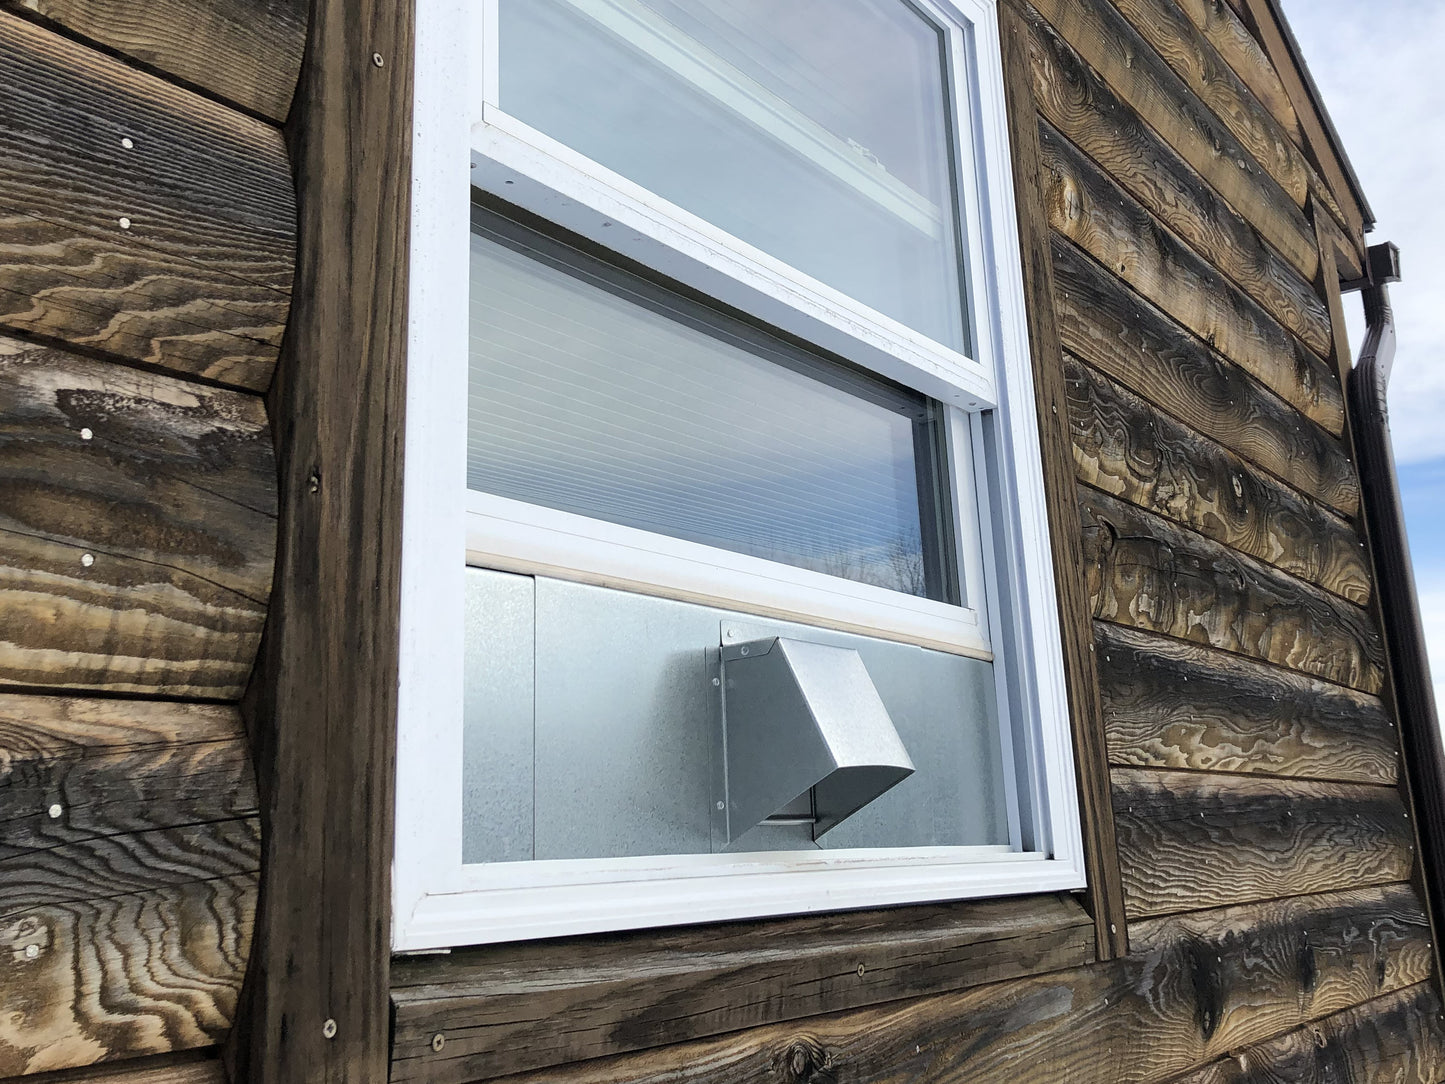 Window Dryer Vent In Use (outside view)